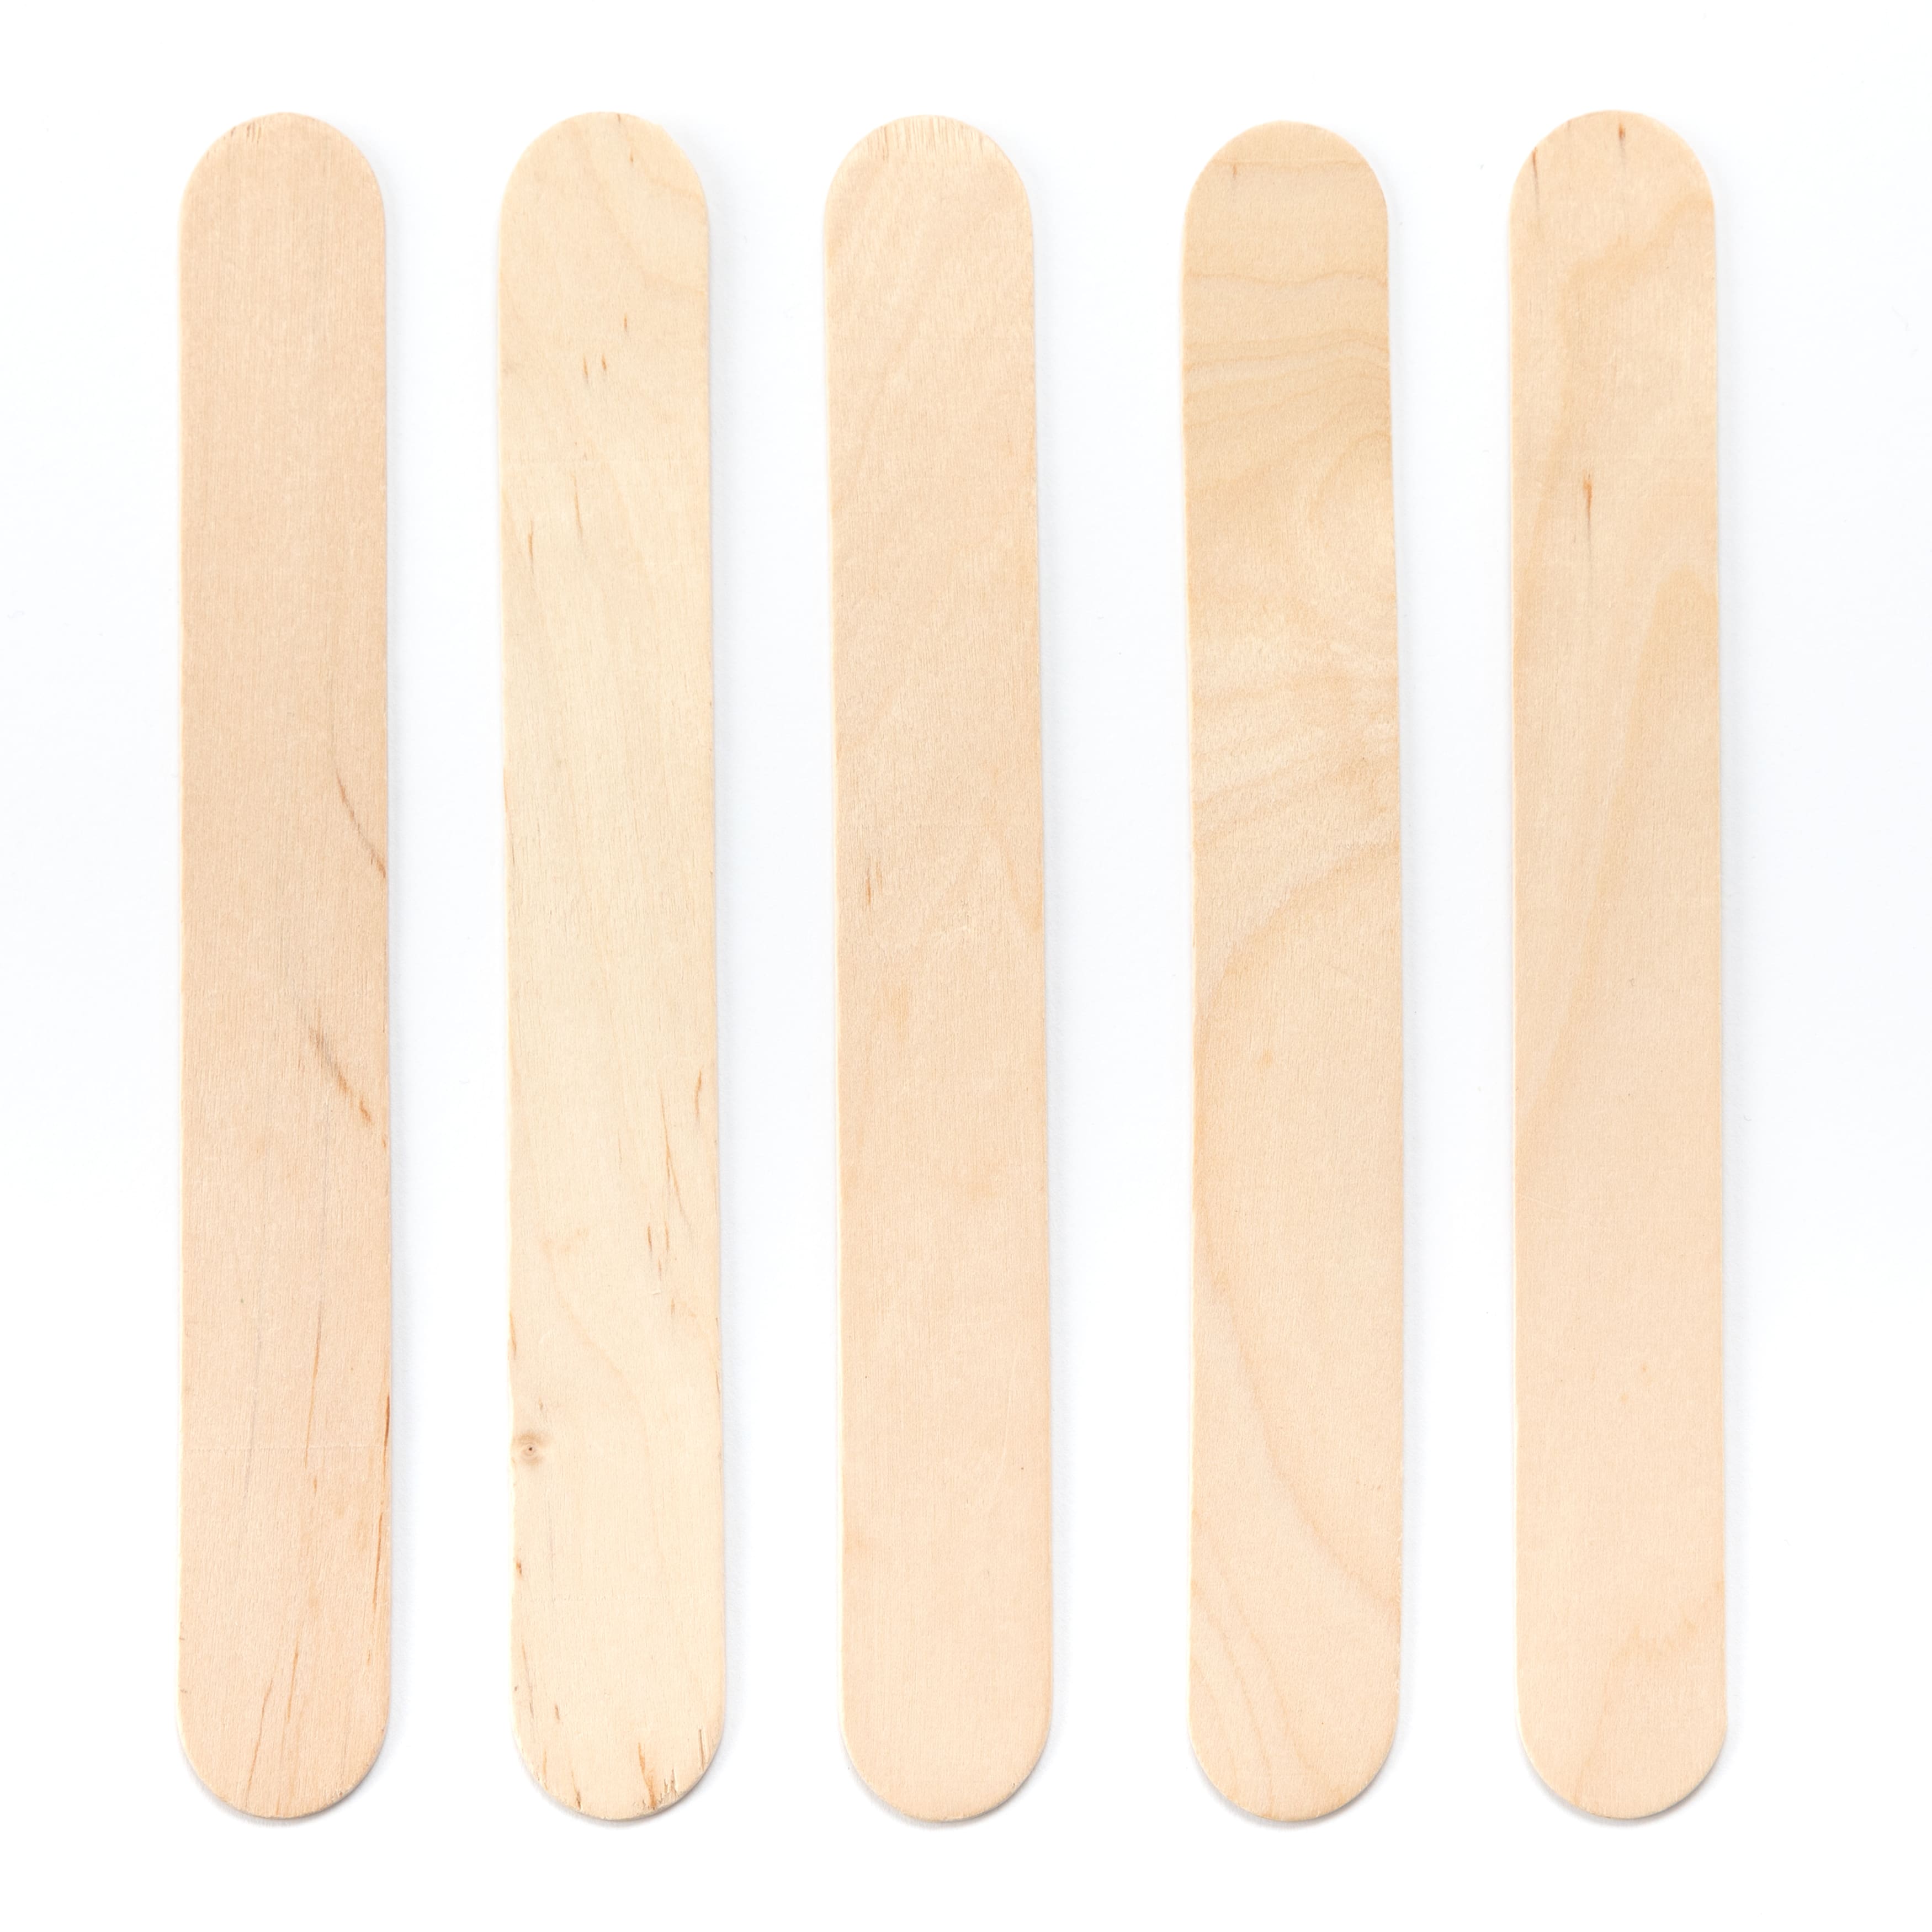 Popsicle Wooden Sticks Craft, Wooden Popsicle Stick Size